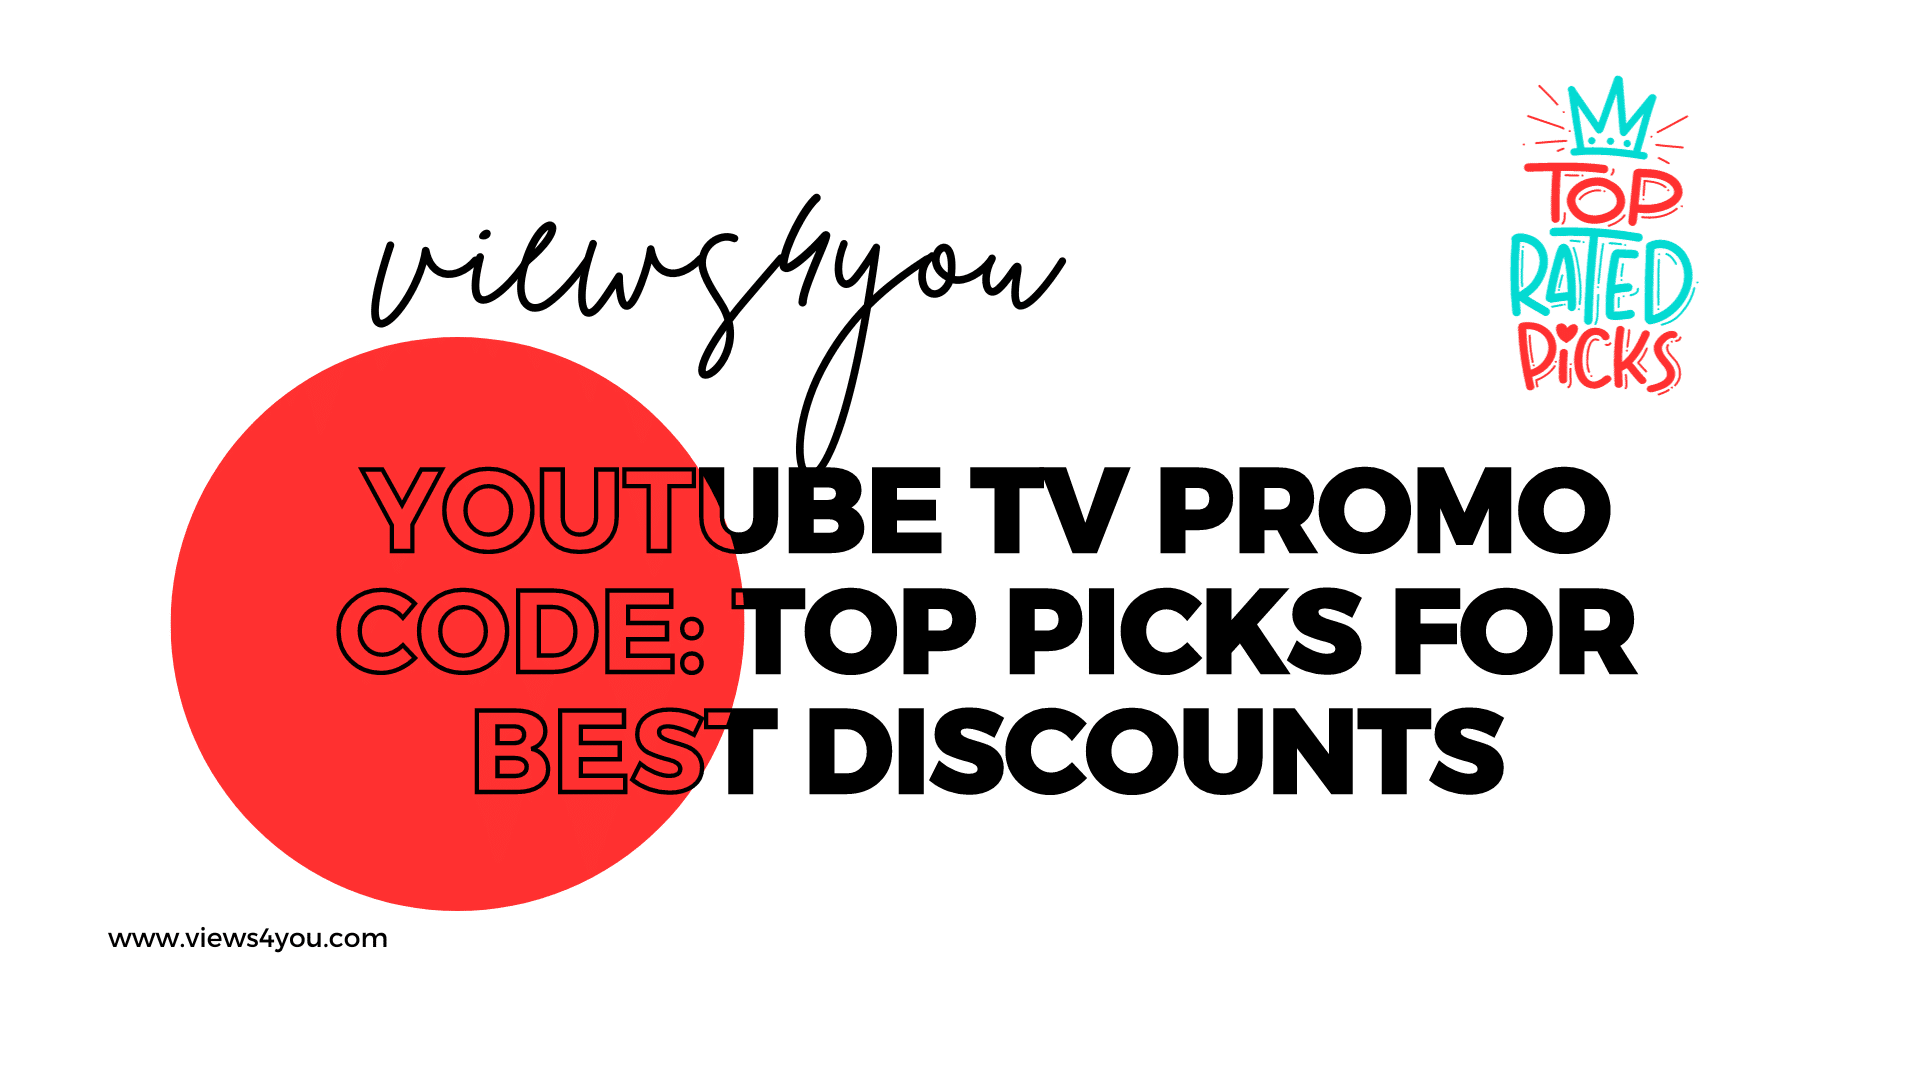 YouTube TV Promo Code: Top Picks for Best Discounts